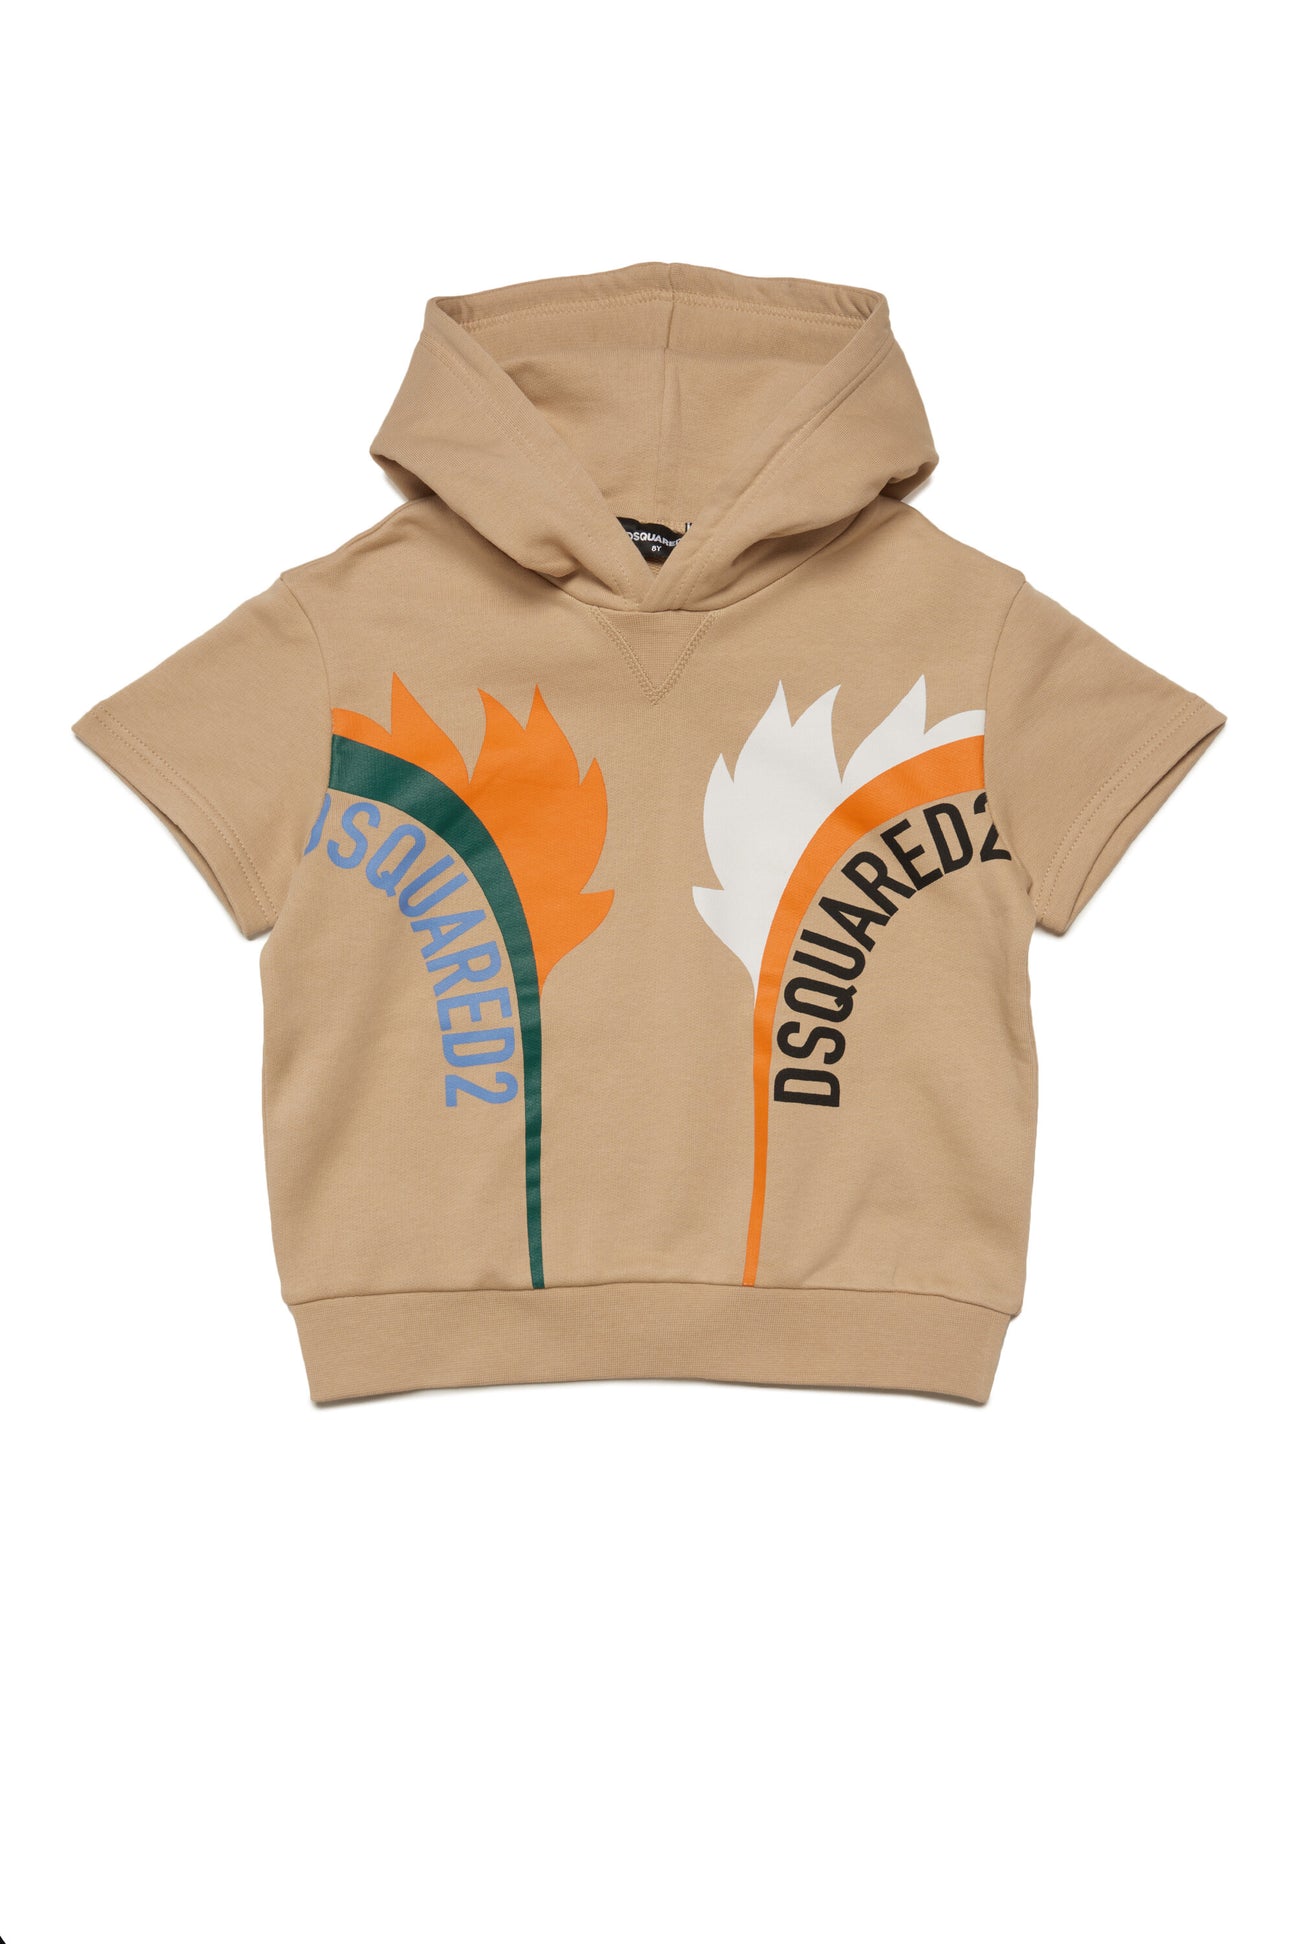 Dsquared2 Clothing, Accessories and Shoes for Boys, Girls and 